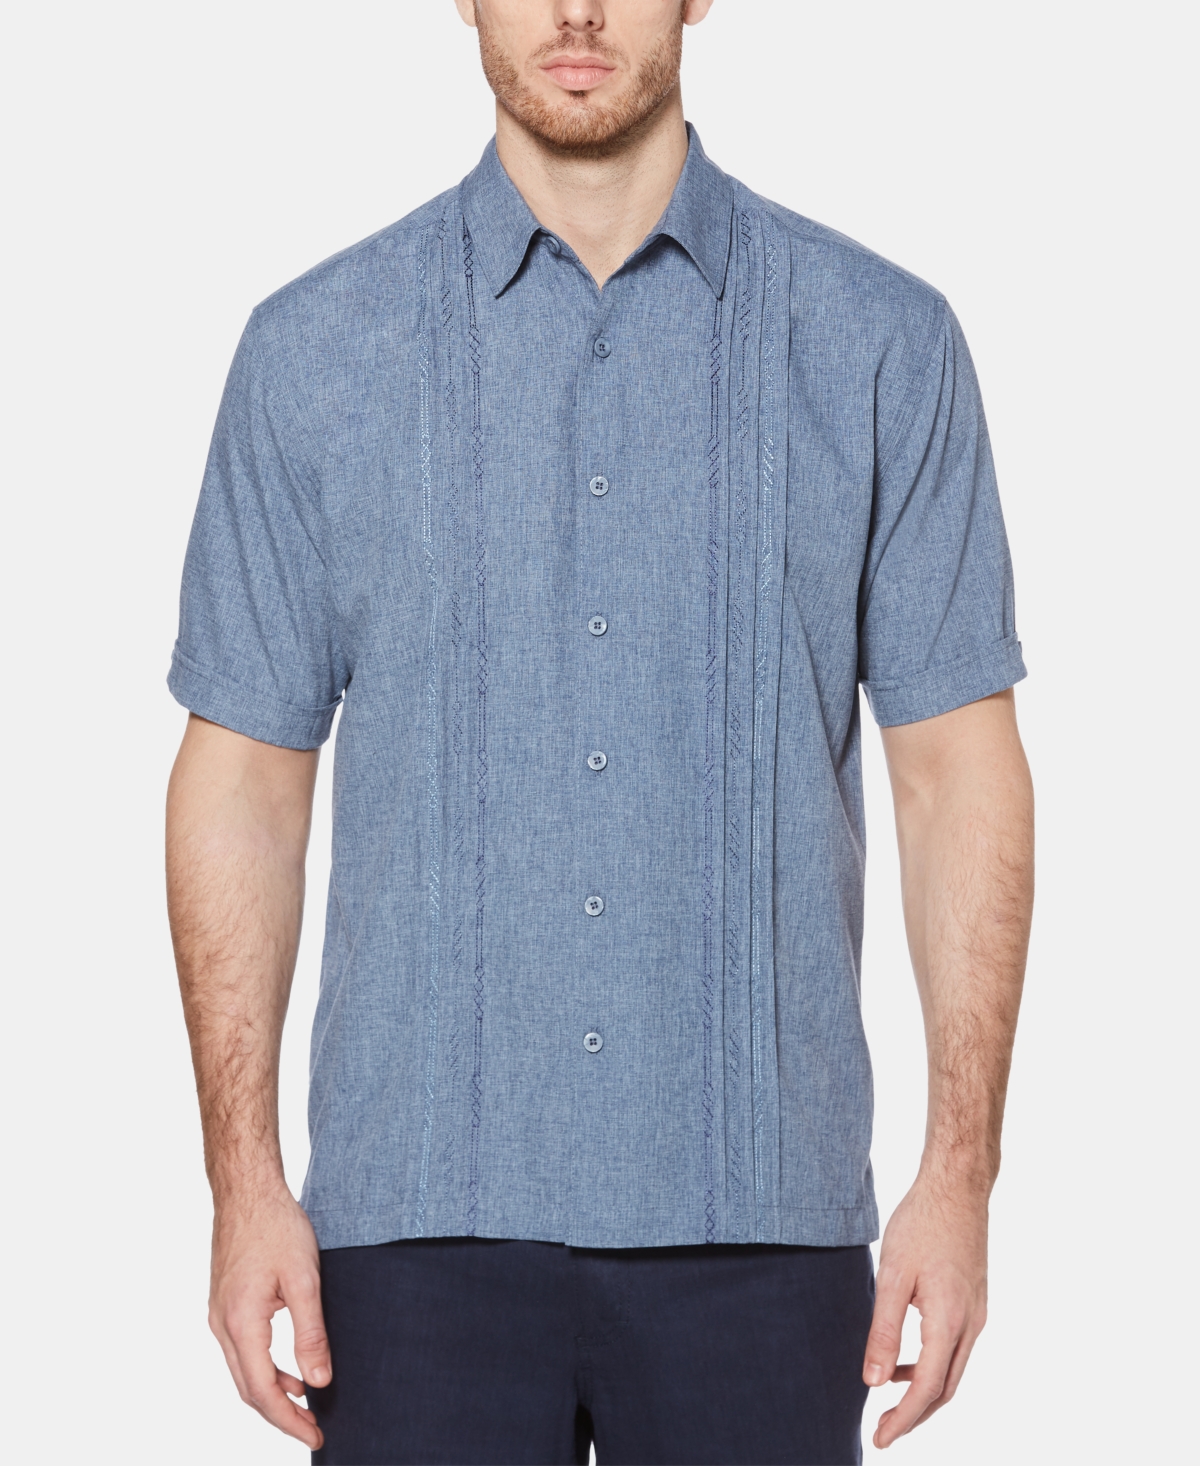 Men's Geo Embroidered Panel Chambray Shirt - Delphinium Blue